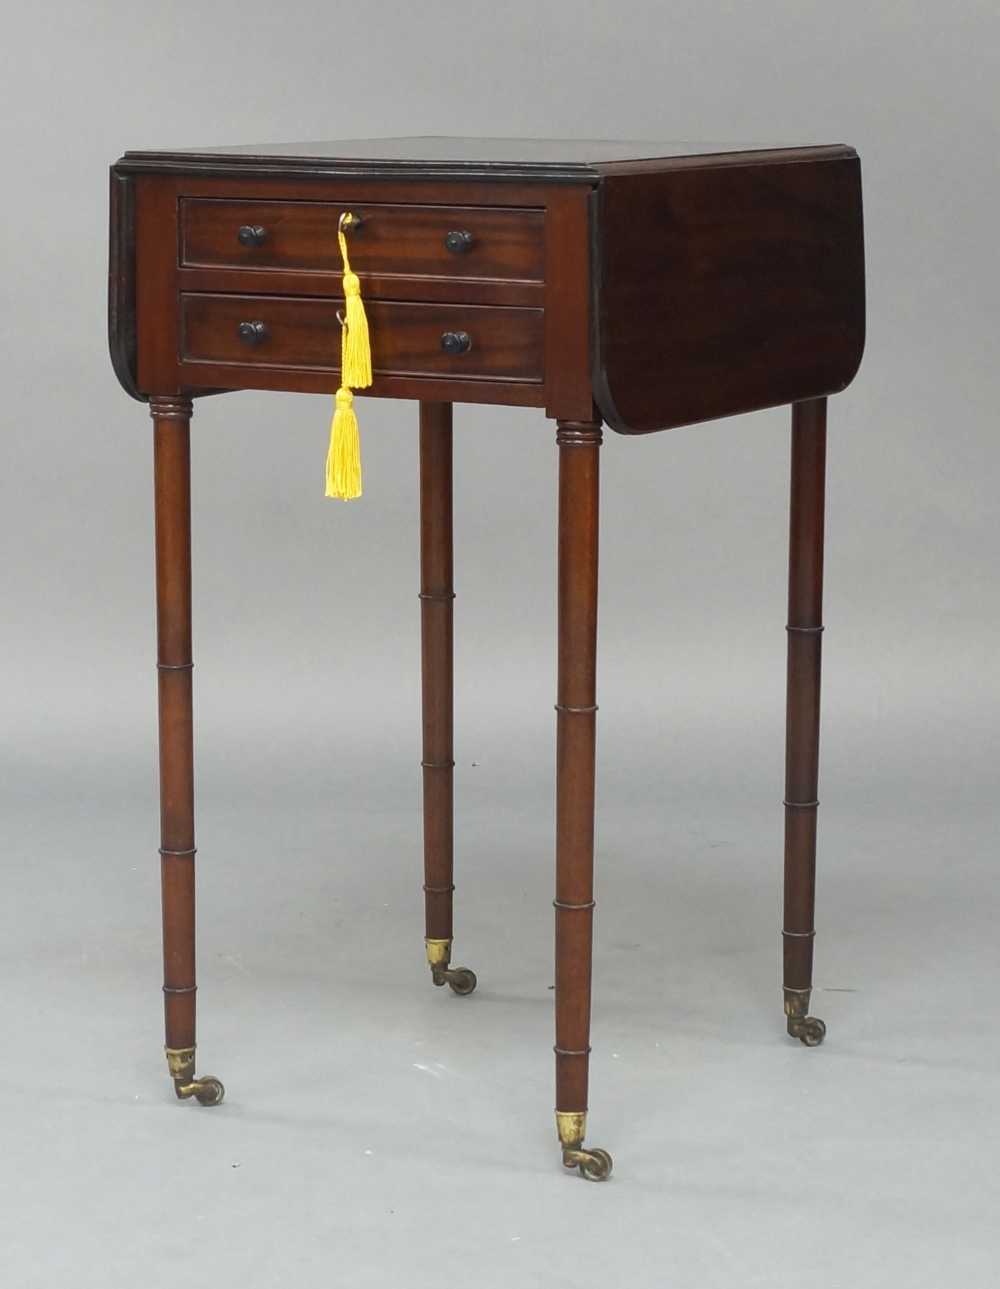 A late 19th century mahogany Pembroke table, of diminutive proportions, with two drawers and two